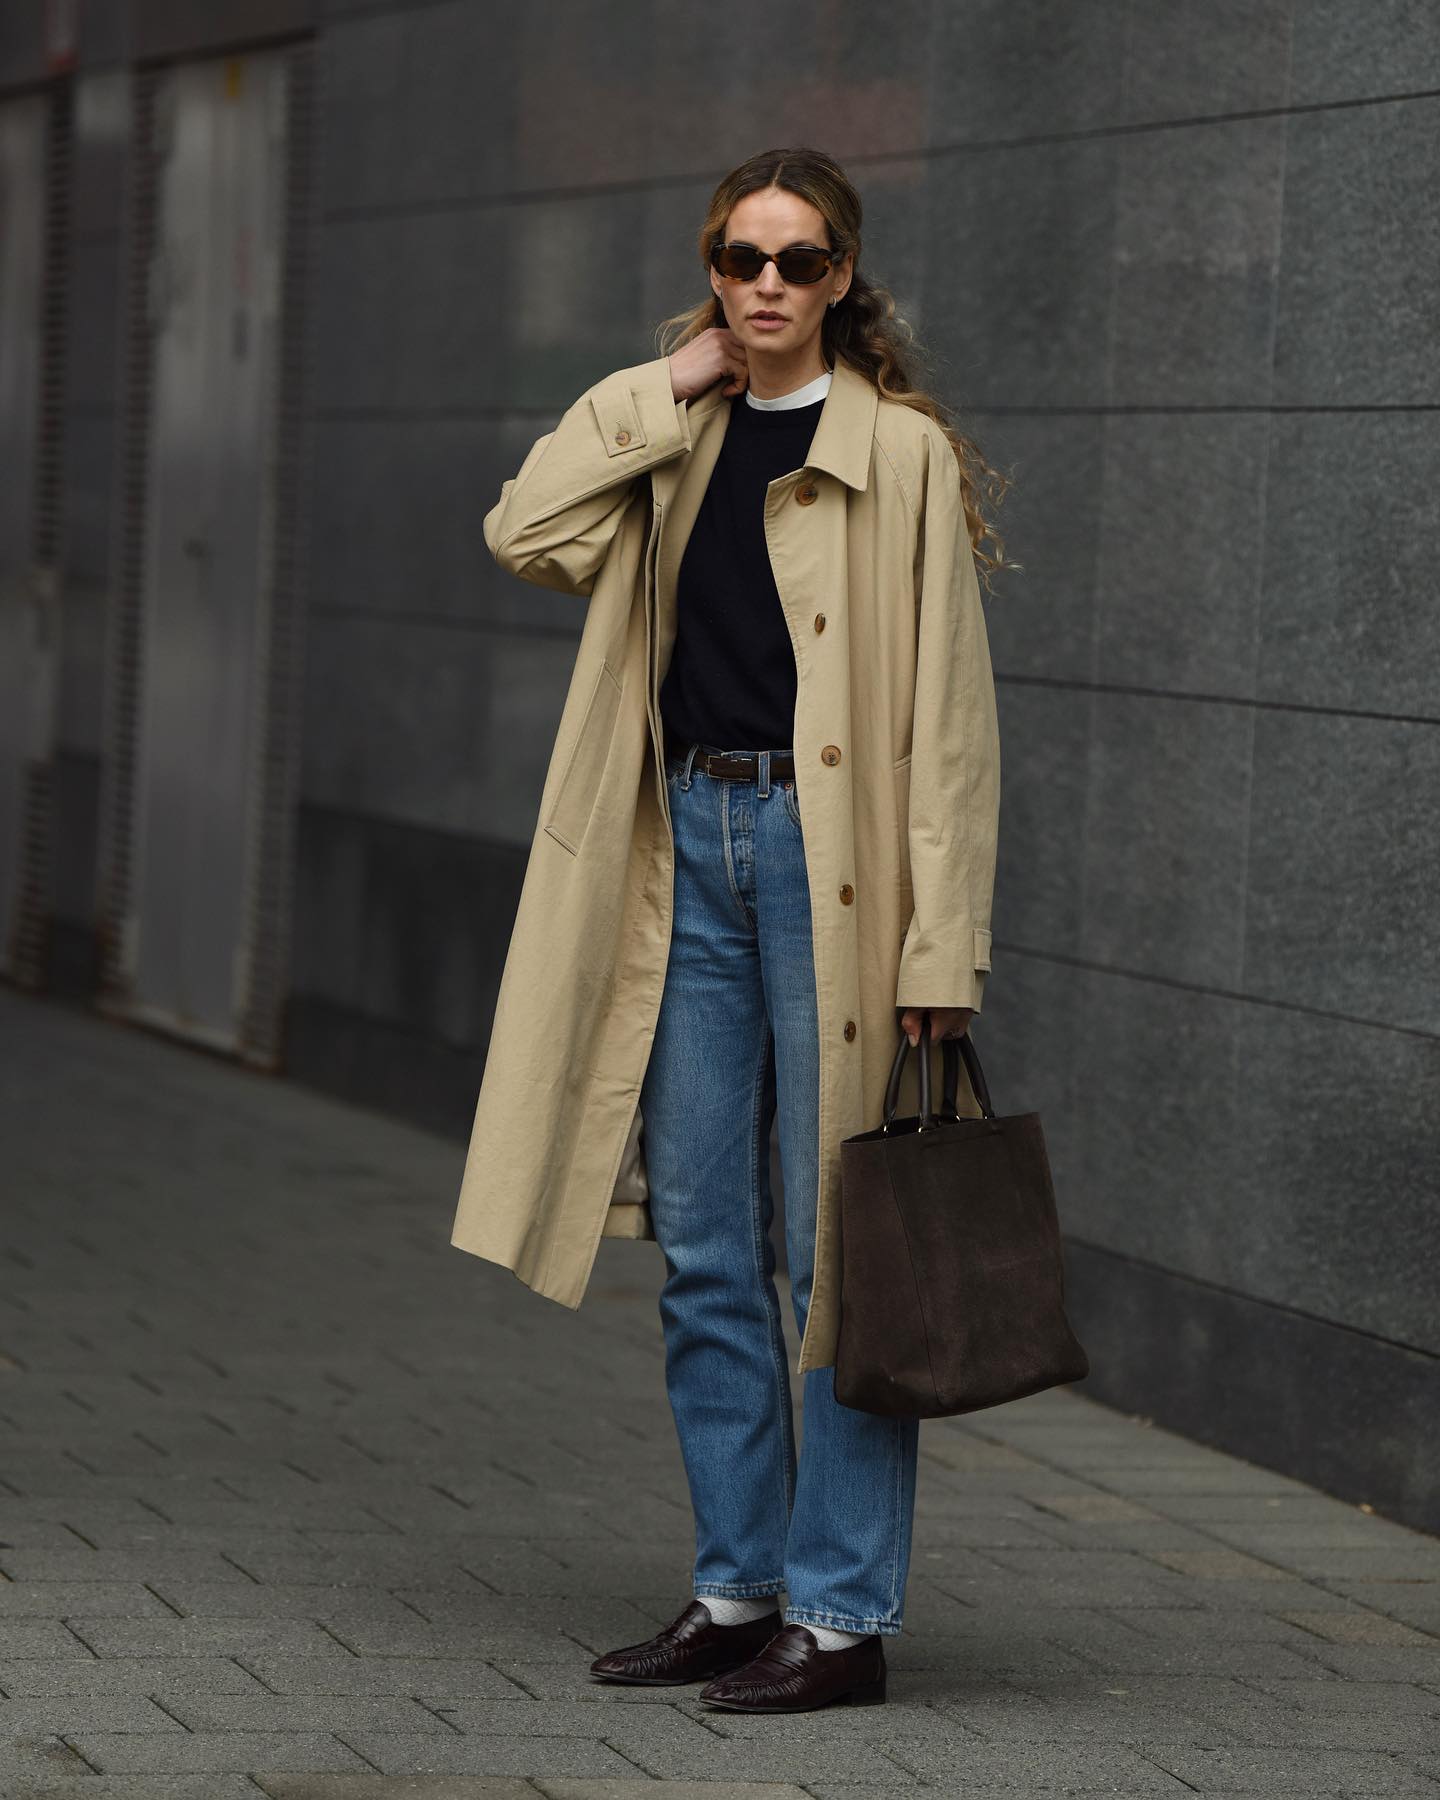 Woman wearing khaki trench coat, black sweater, black sunglasses, belt, blue jeans, loafers, and carrying brown suede handbag